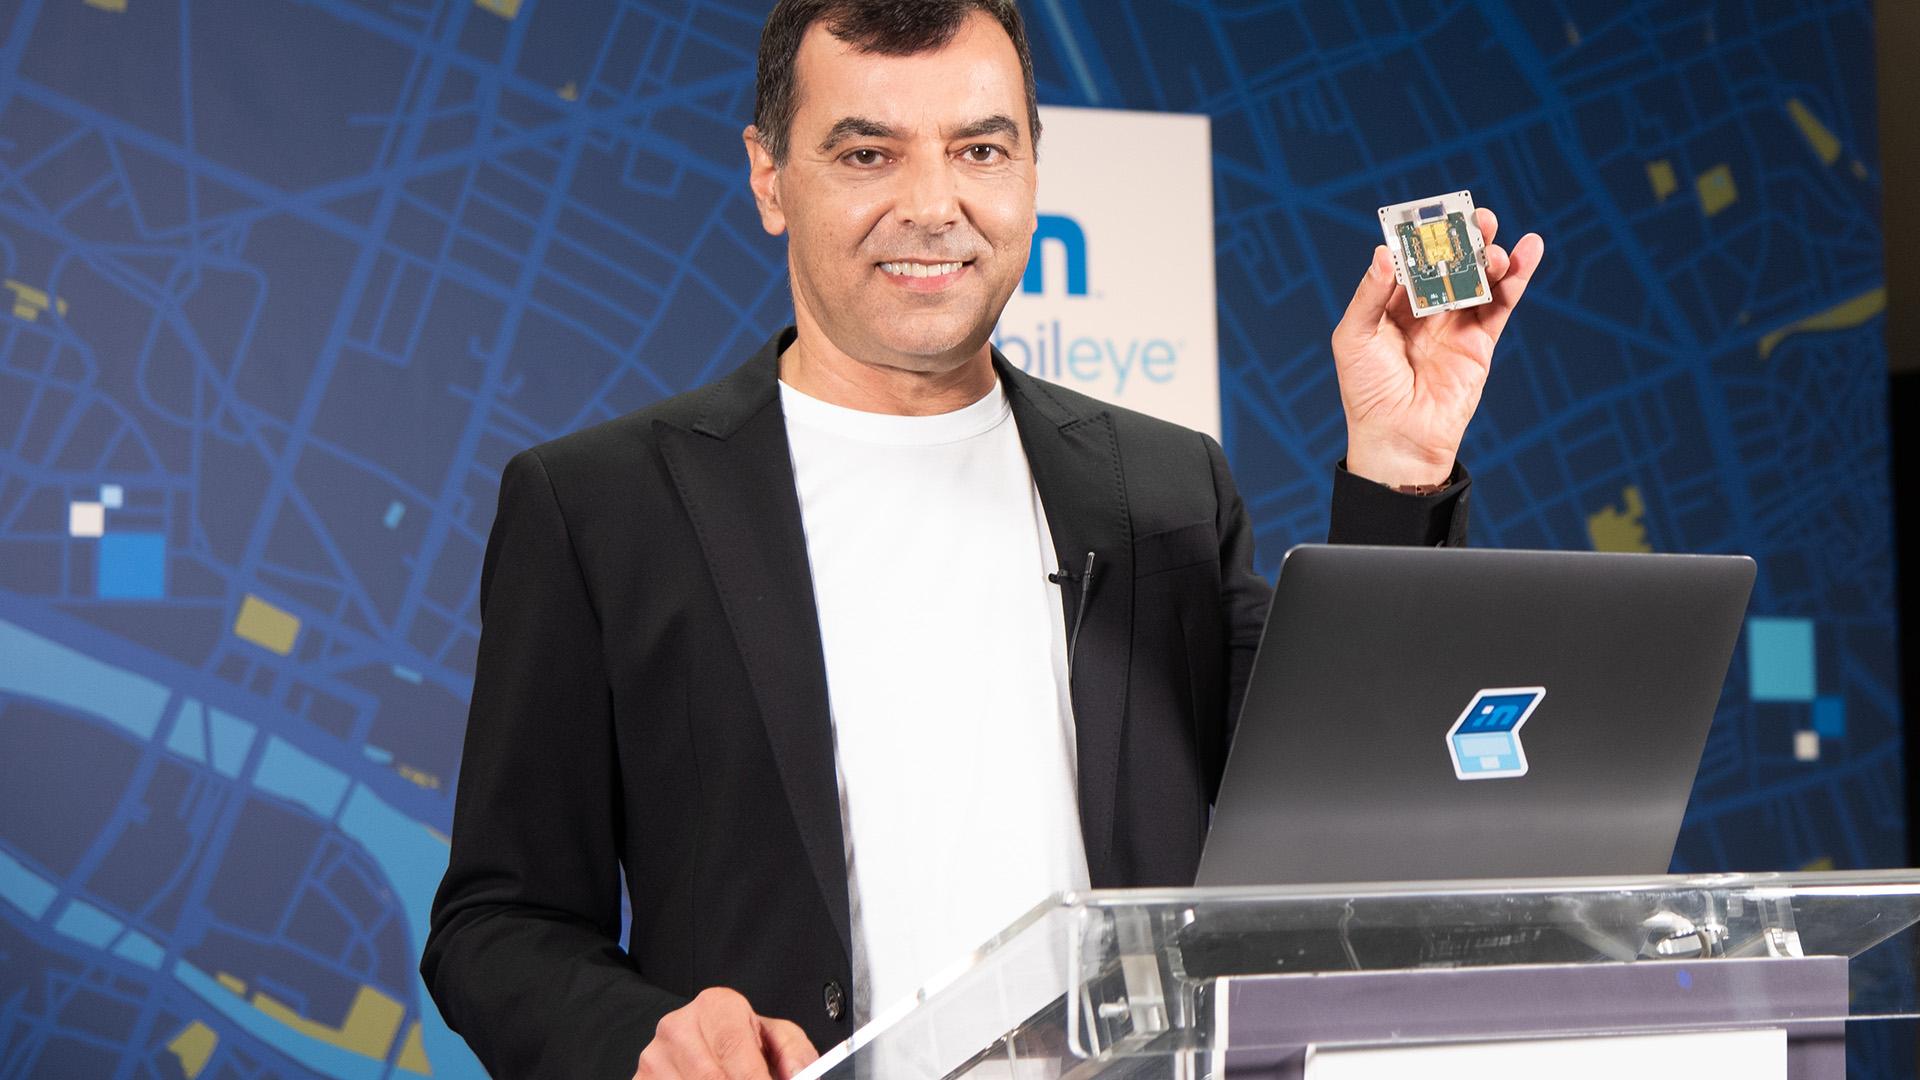 During his annual "Under the Hood" address at the all-virtual CES 2021, Prof. Amnon Shashua, president and CEO of Mobileye, shows off a new silicon photonics lidar SoC that will deliver frequency-modulated continuous wave (FMCW) lidar on a chip for autonomous vehicles beginning in 2025. (Credit: Intel Corporation)